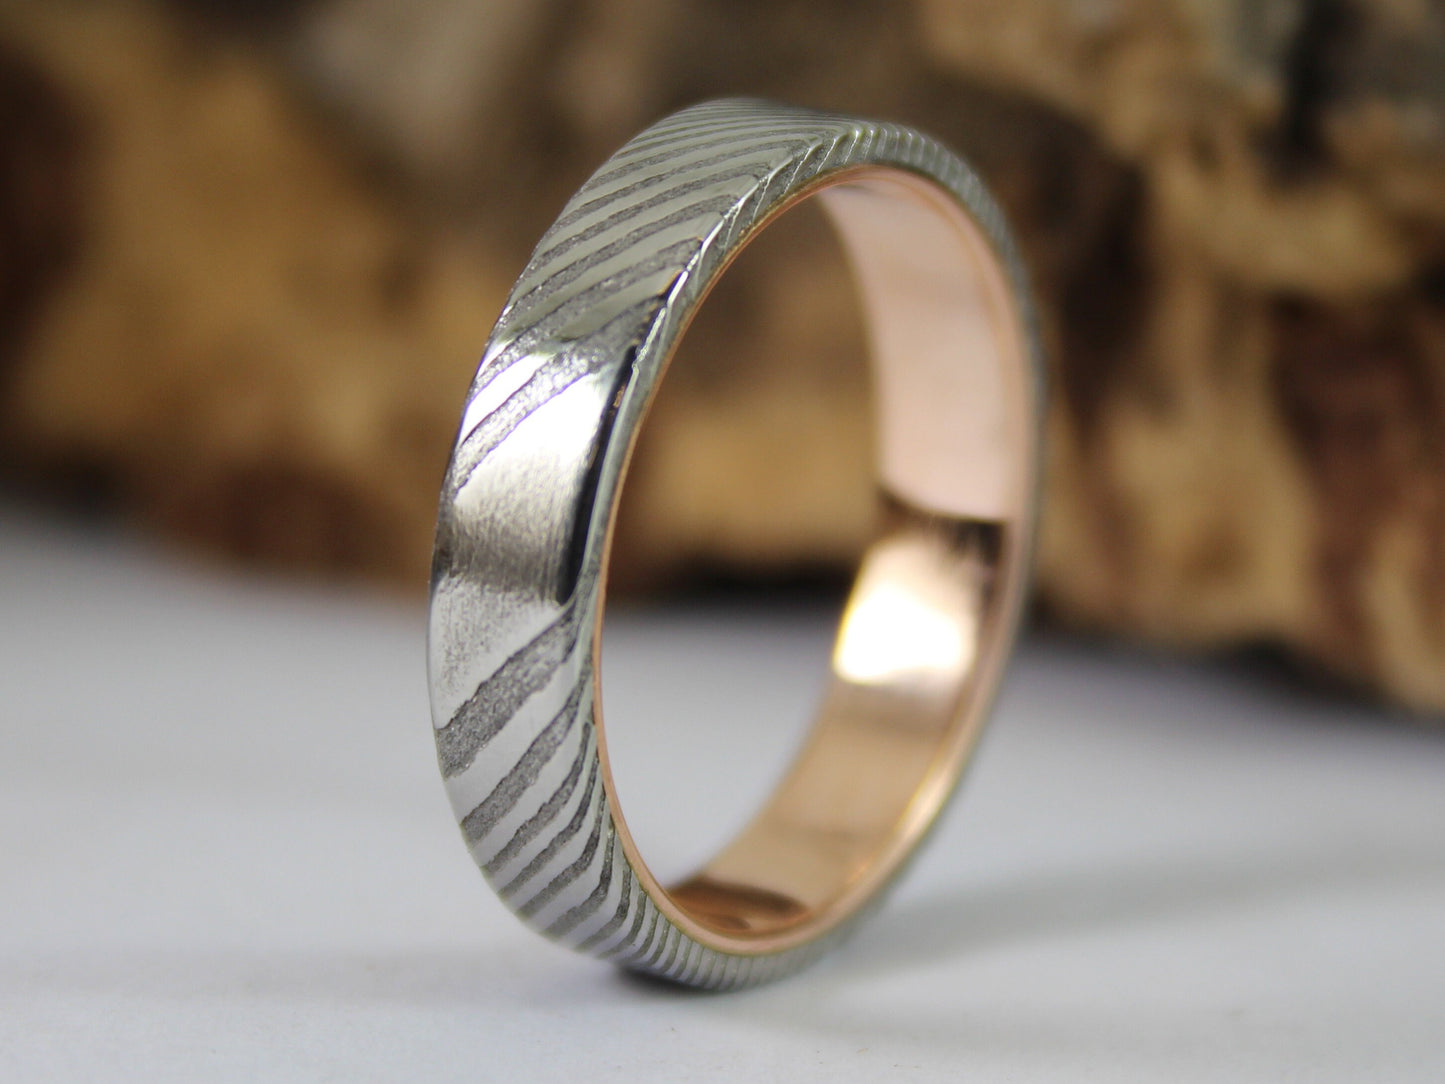 Wood Grain Damascus Steel Ring with 9ct Rose Gold Inside